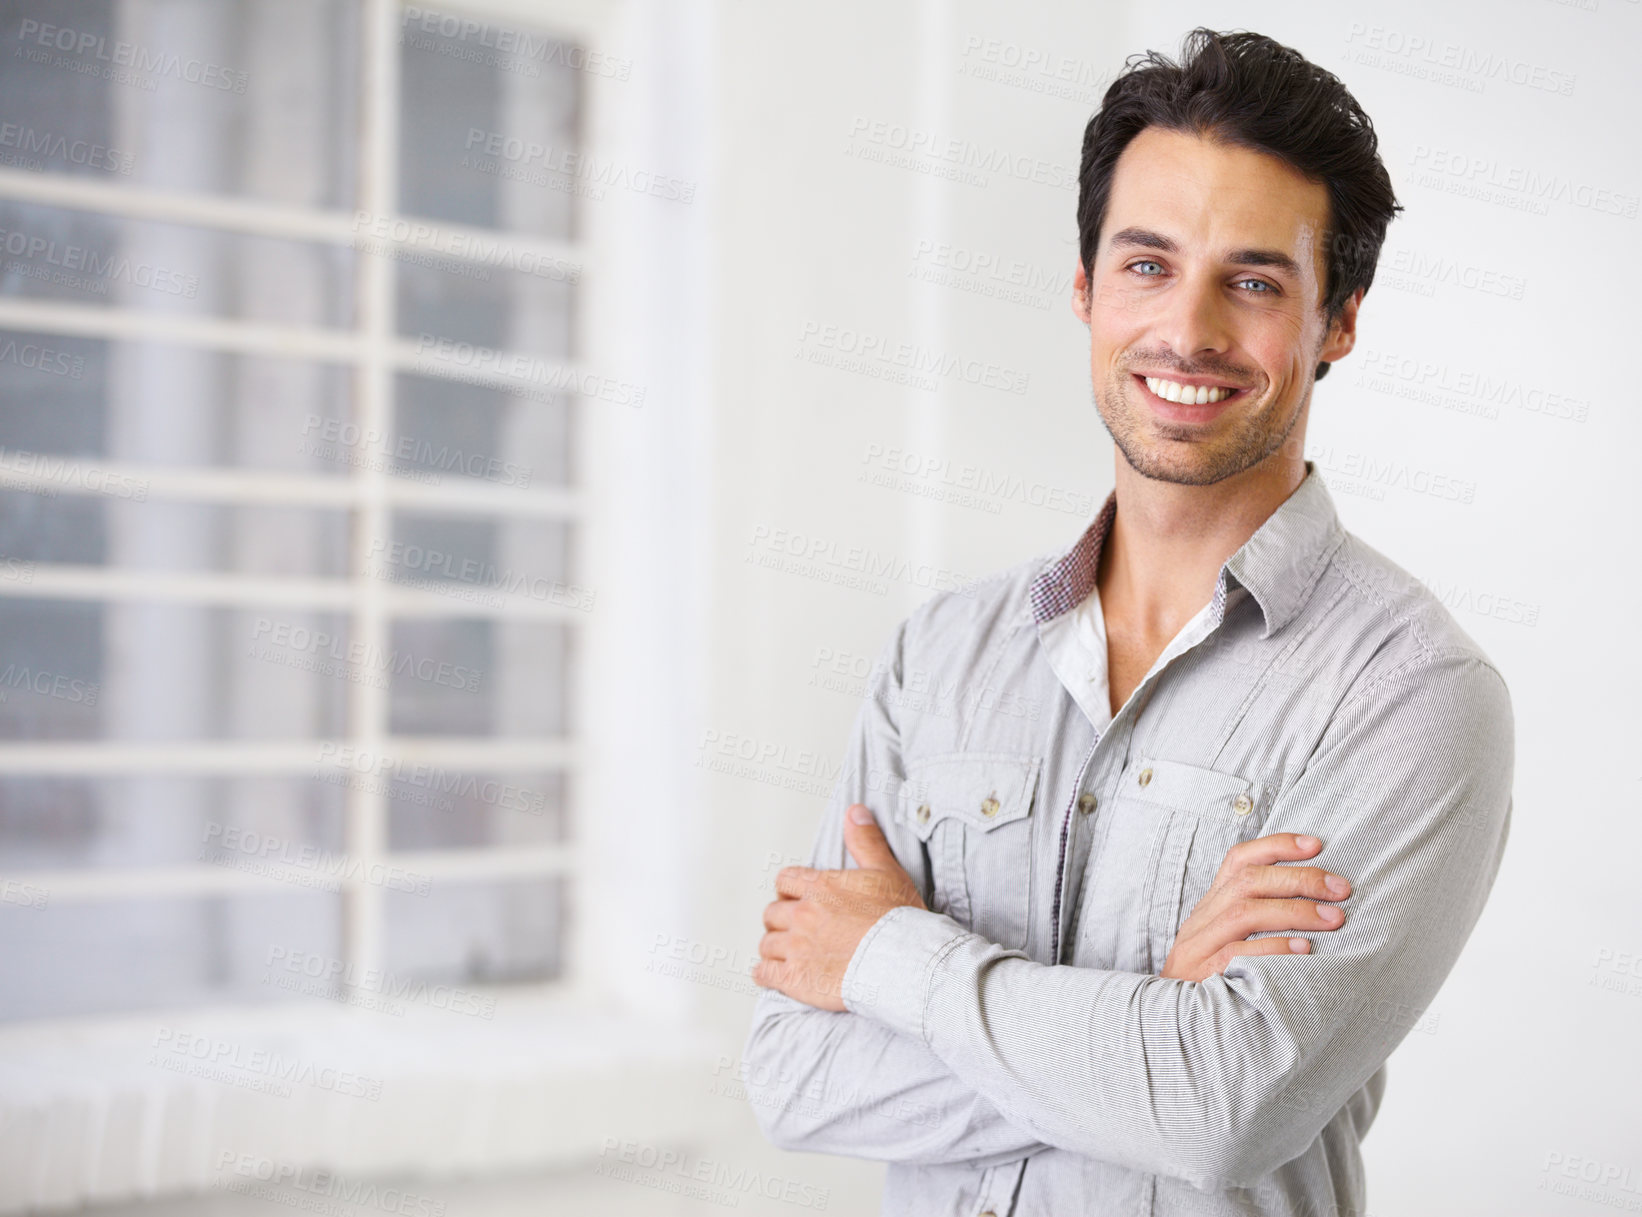 Buy stock photo Portrait of a smiling handsome man with his arms crossed